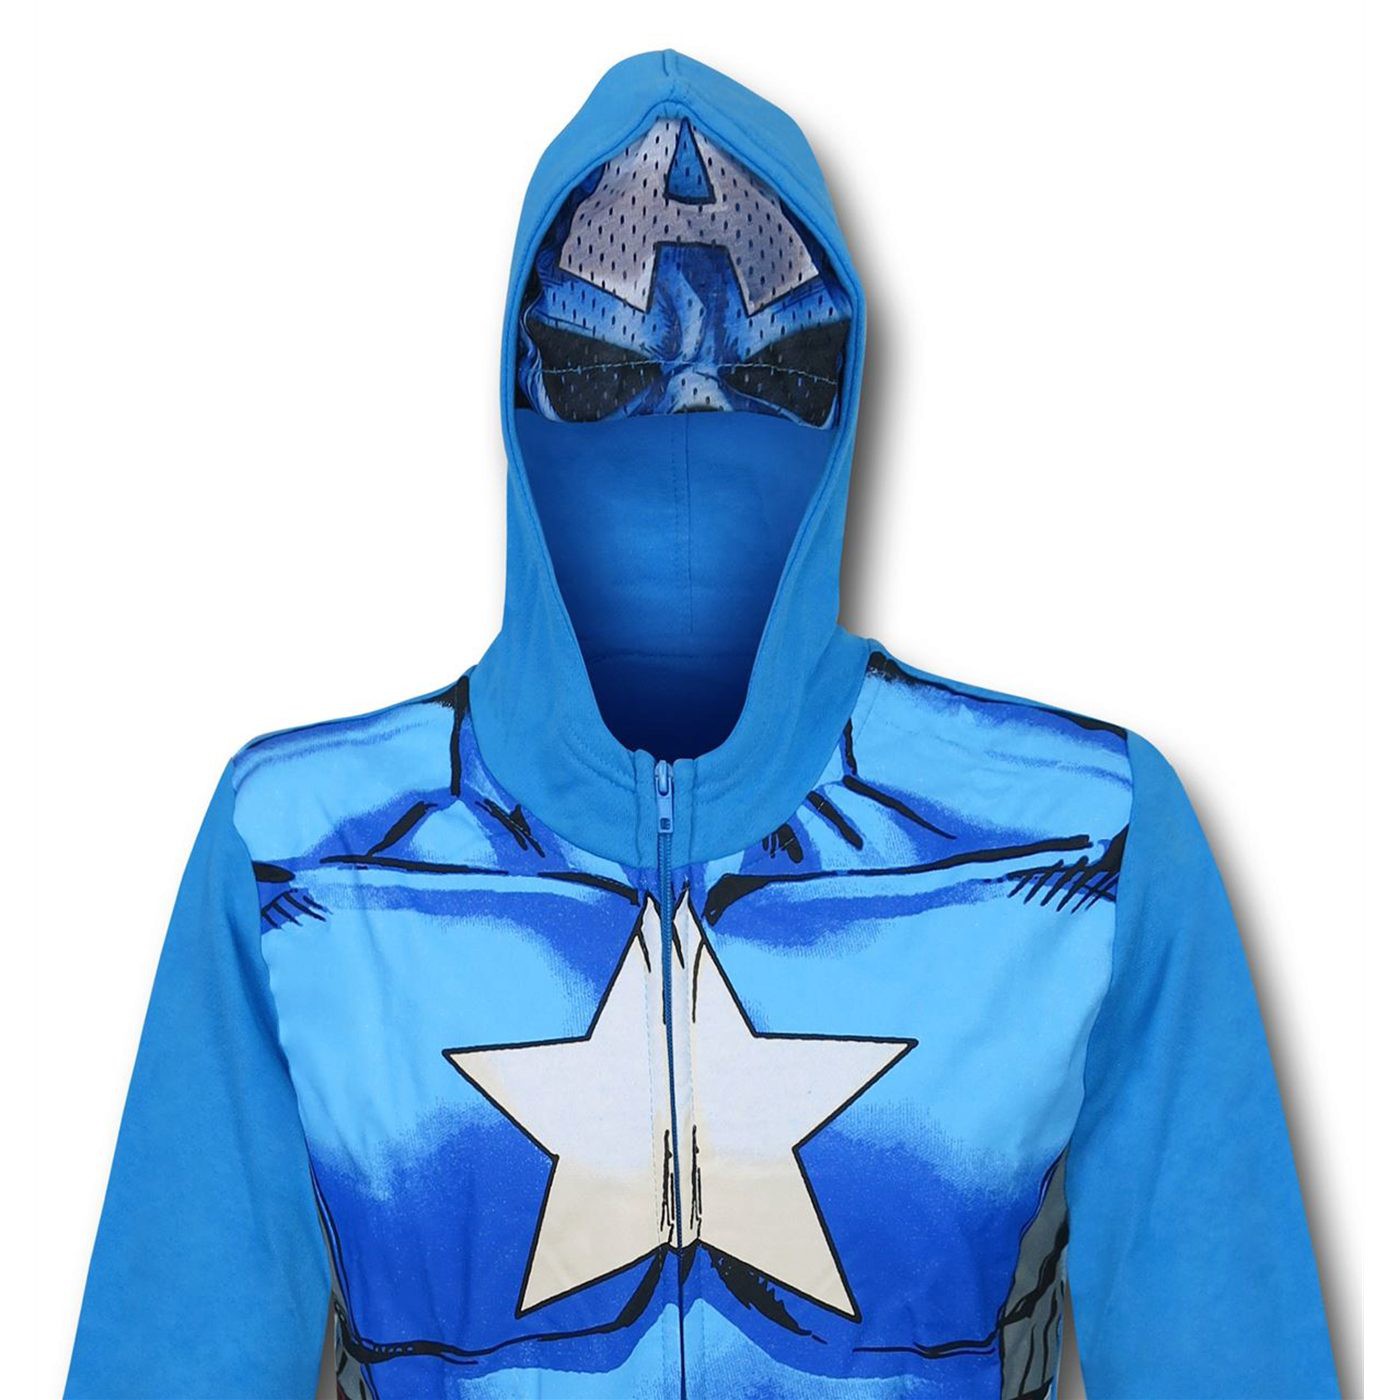 Captain America Costume Kids Zipper Hoodie with Mask